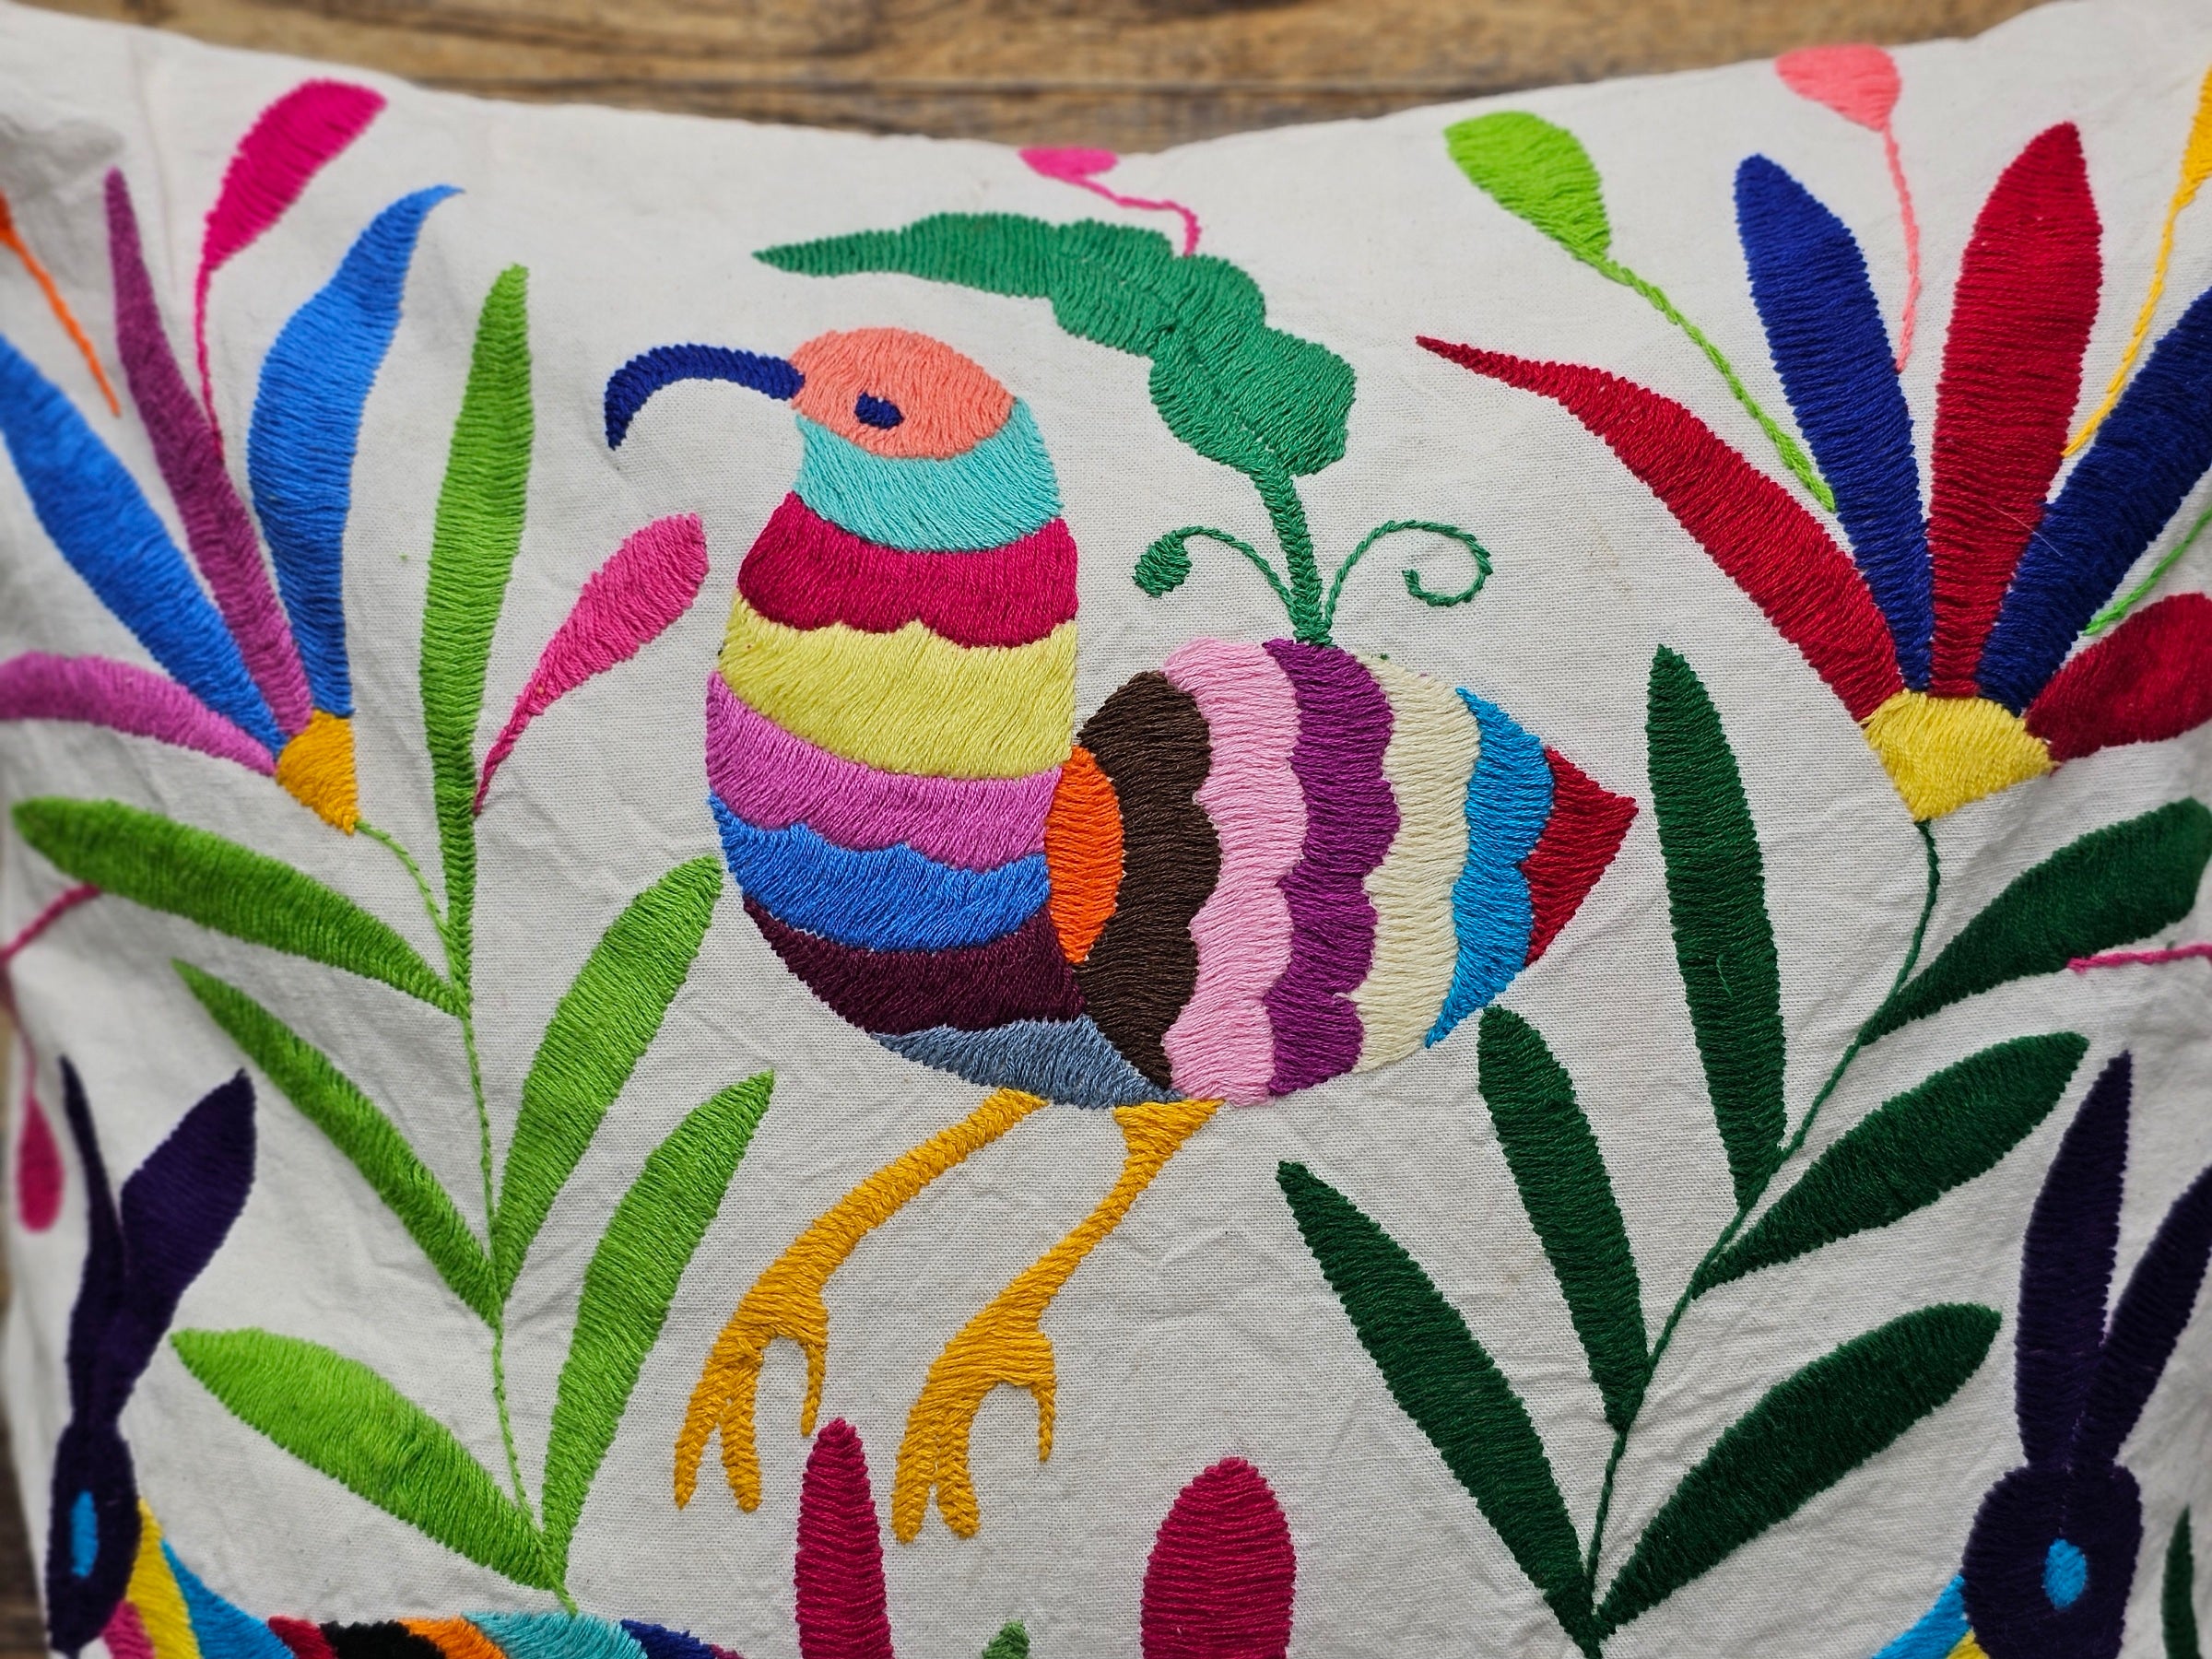 Square Otomi Tenango Pillow Cover with Hand Embroidered Birds, Flowers, and Animals in Vibrant Colors. Handmade in Mexico. Ships from the USA. Buy now at www.felipeandgrace.com.